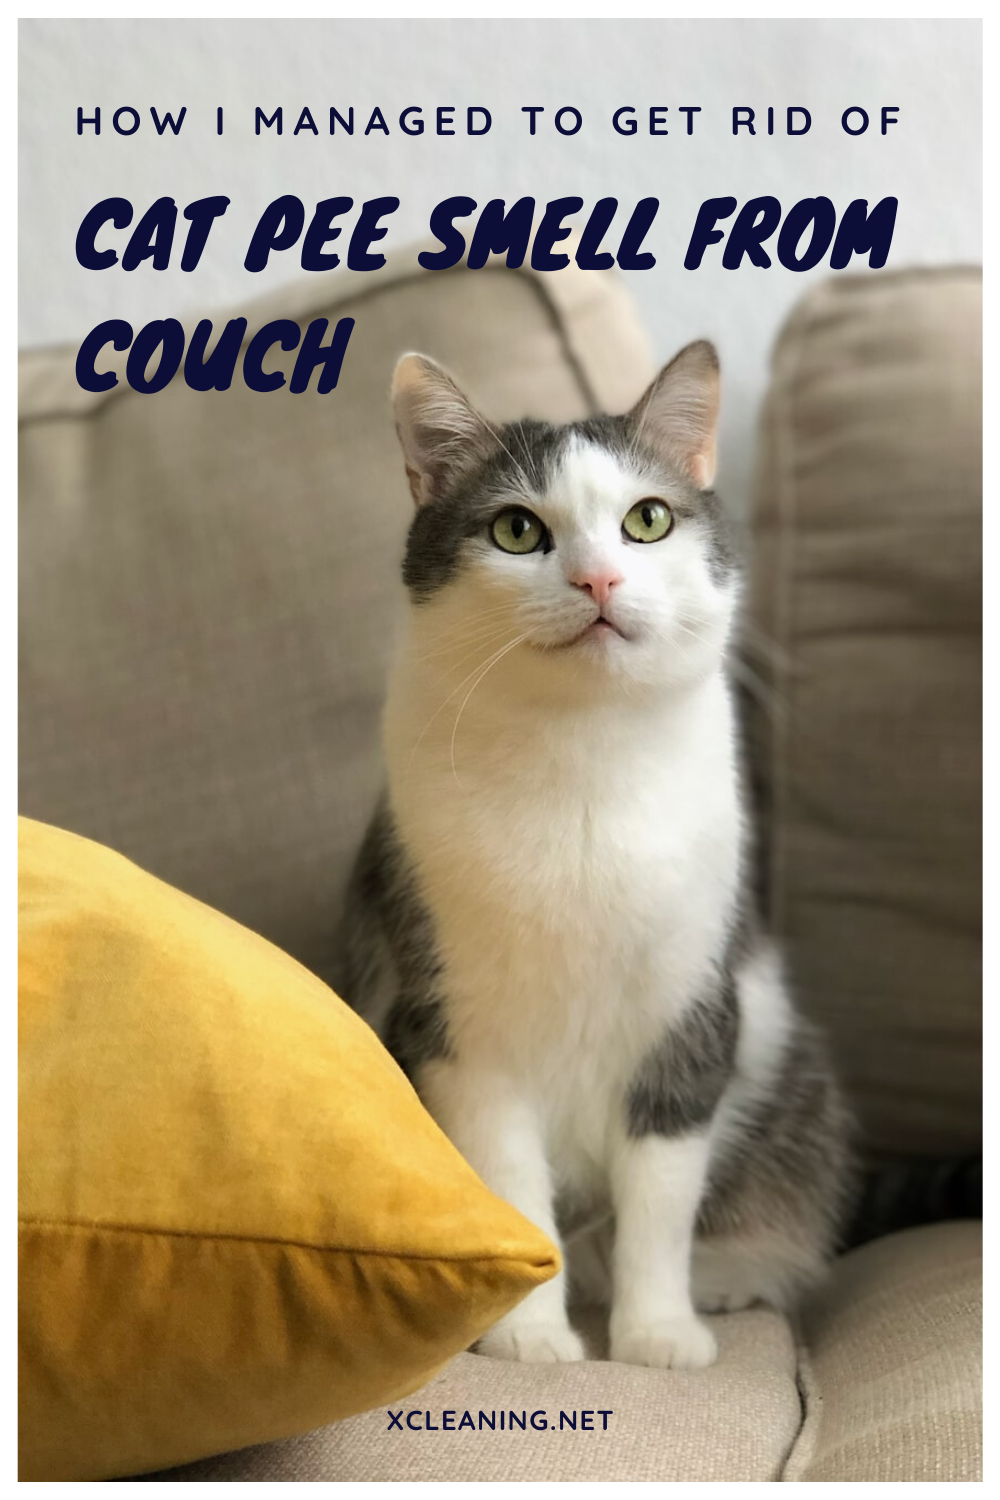 How I Managed To Get Rid Of Cat Pee Smell From Couch ...